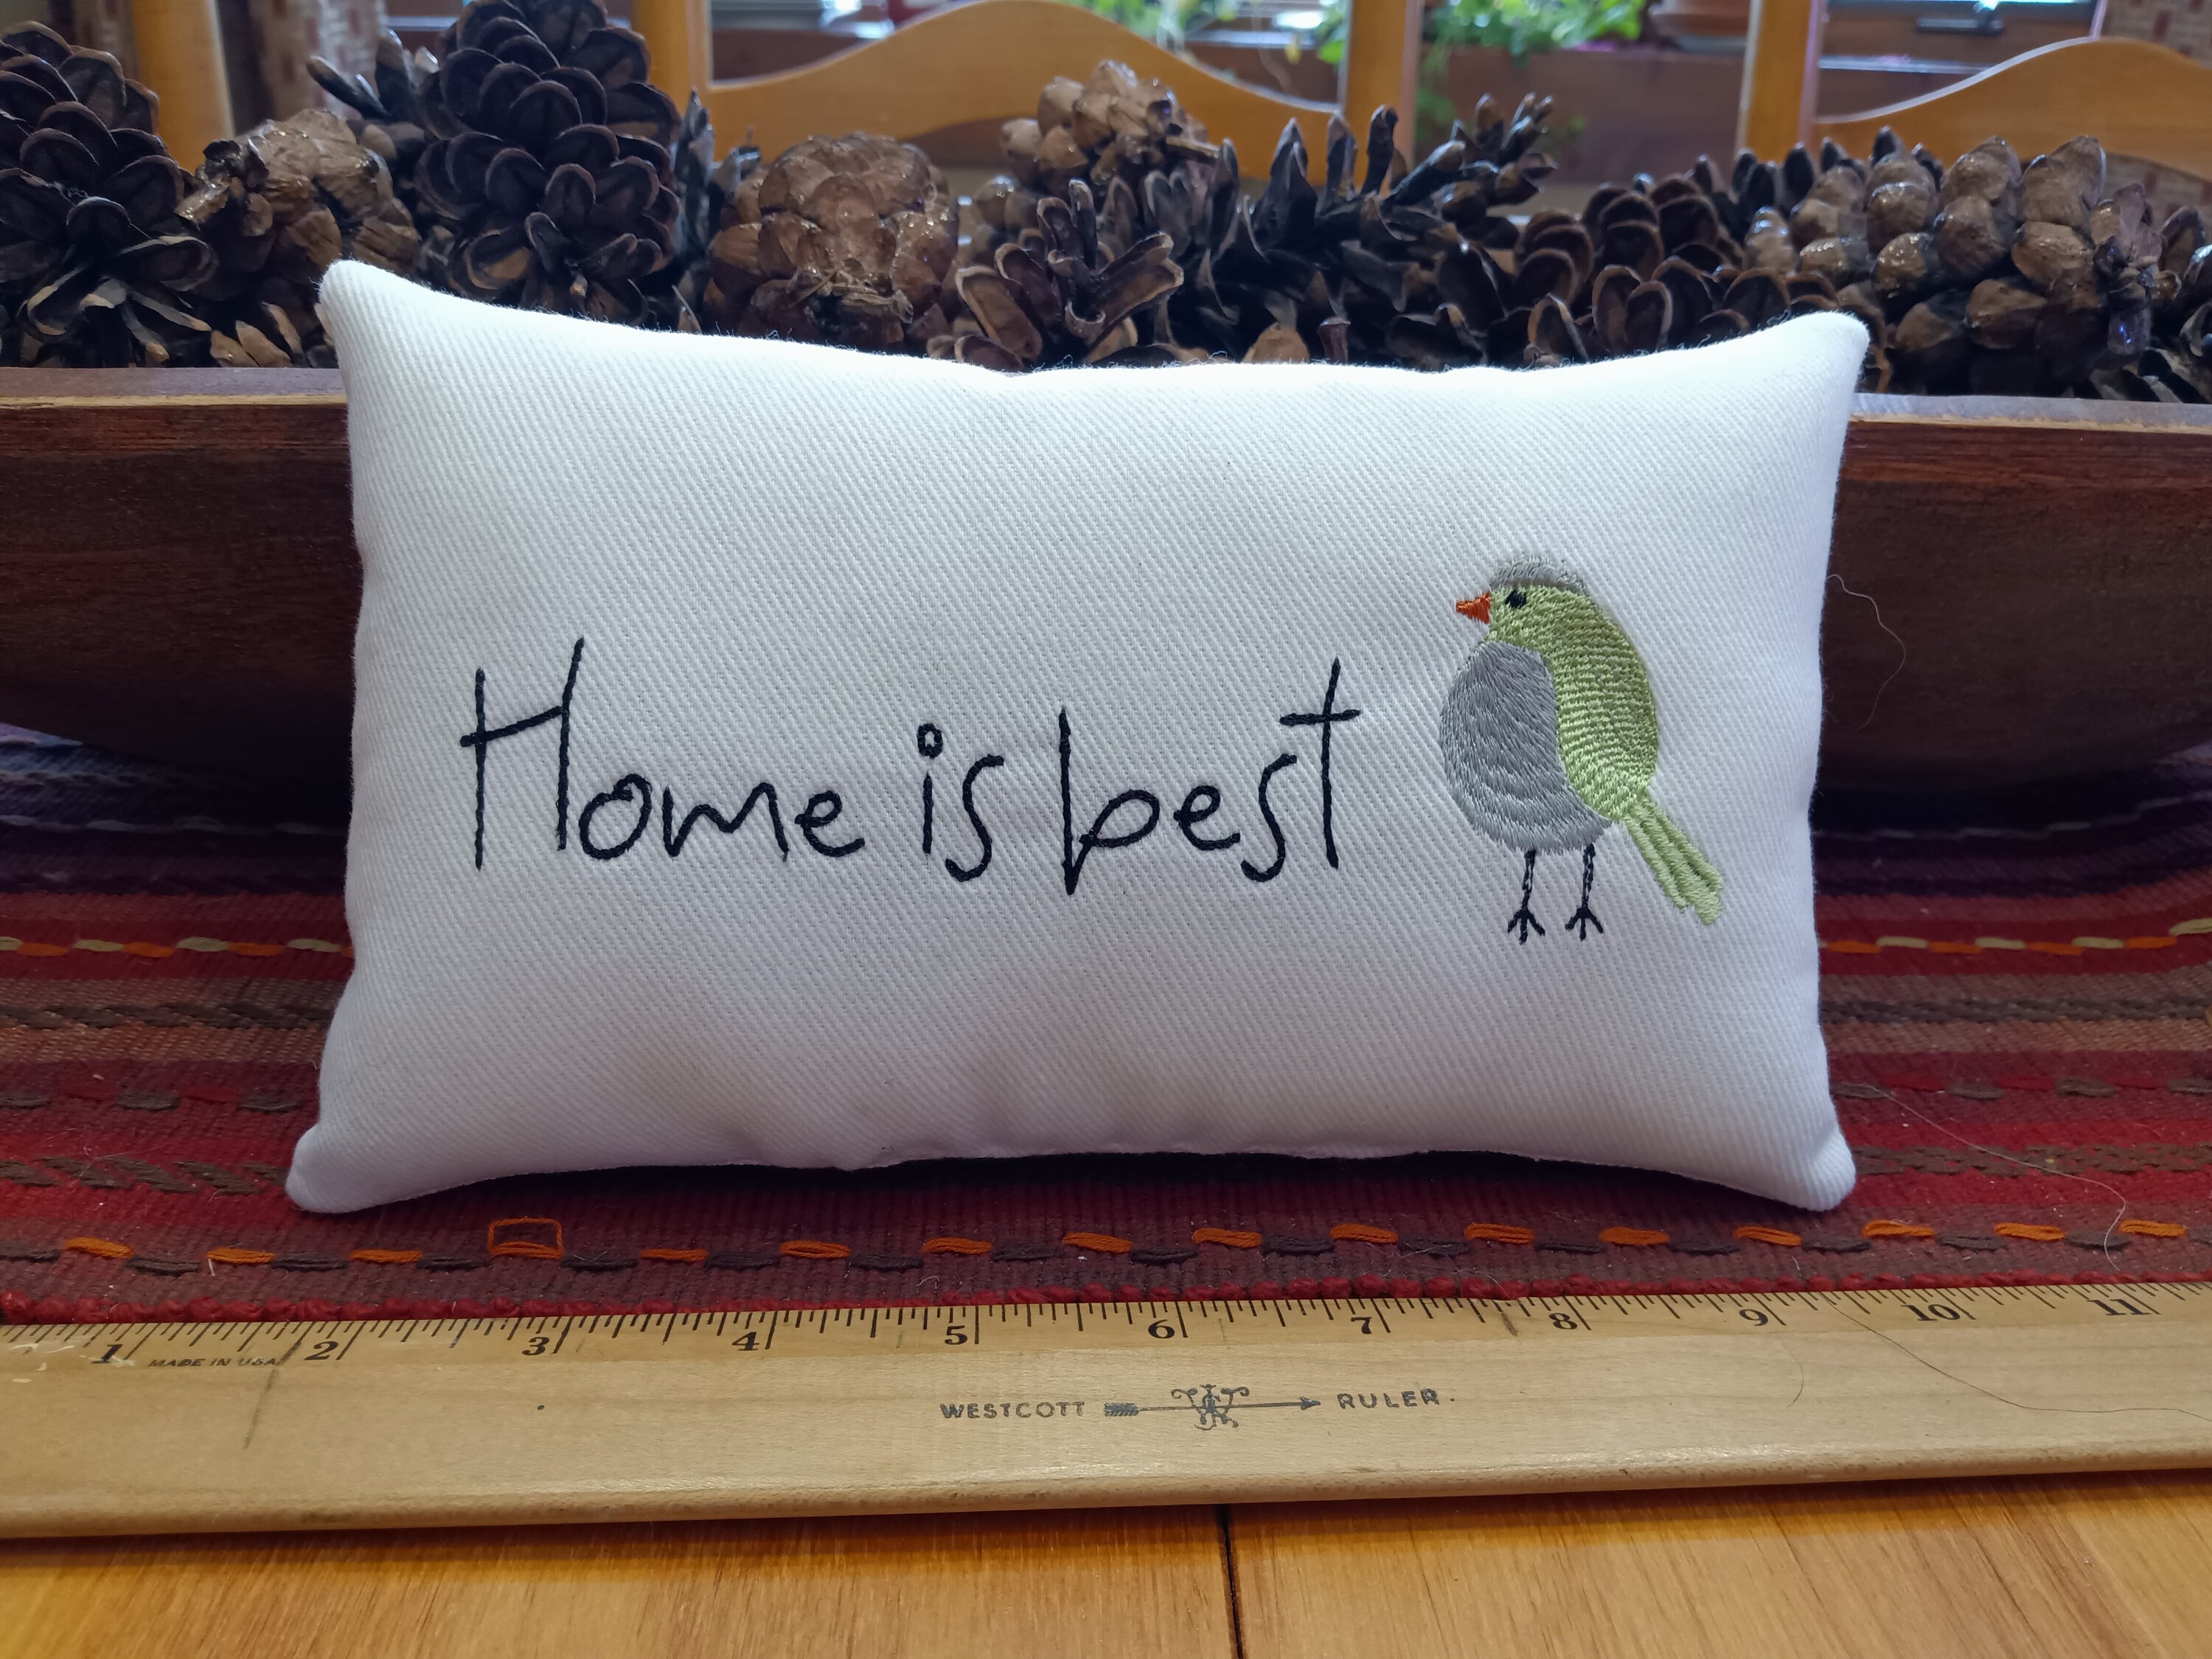 Decorative Throw Pillows for Couch, Bird Embroidery Pillows, Cotton an –  Grace Painting Crafts